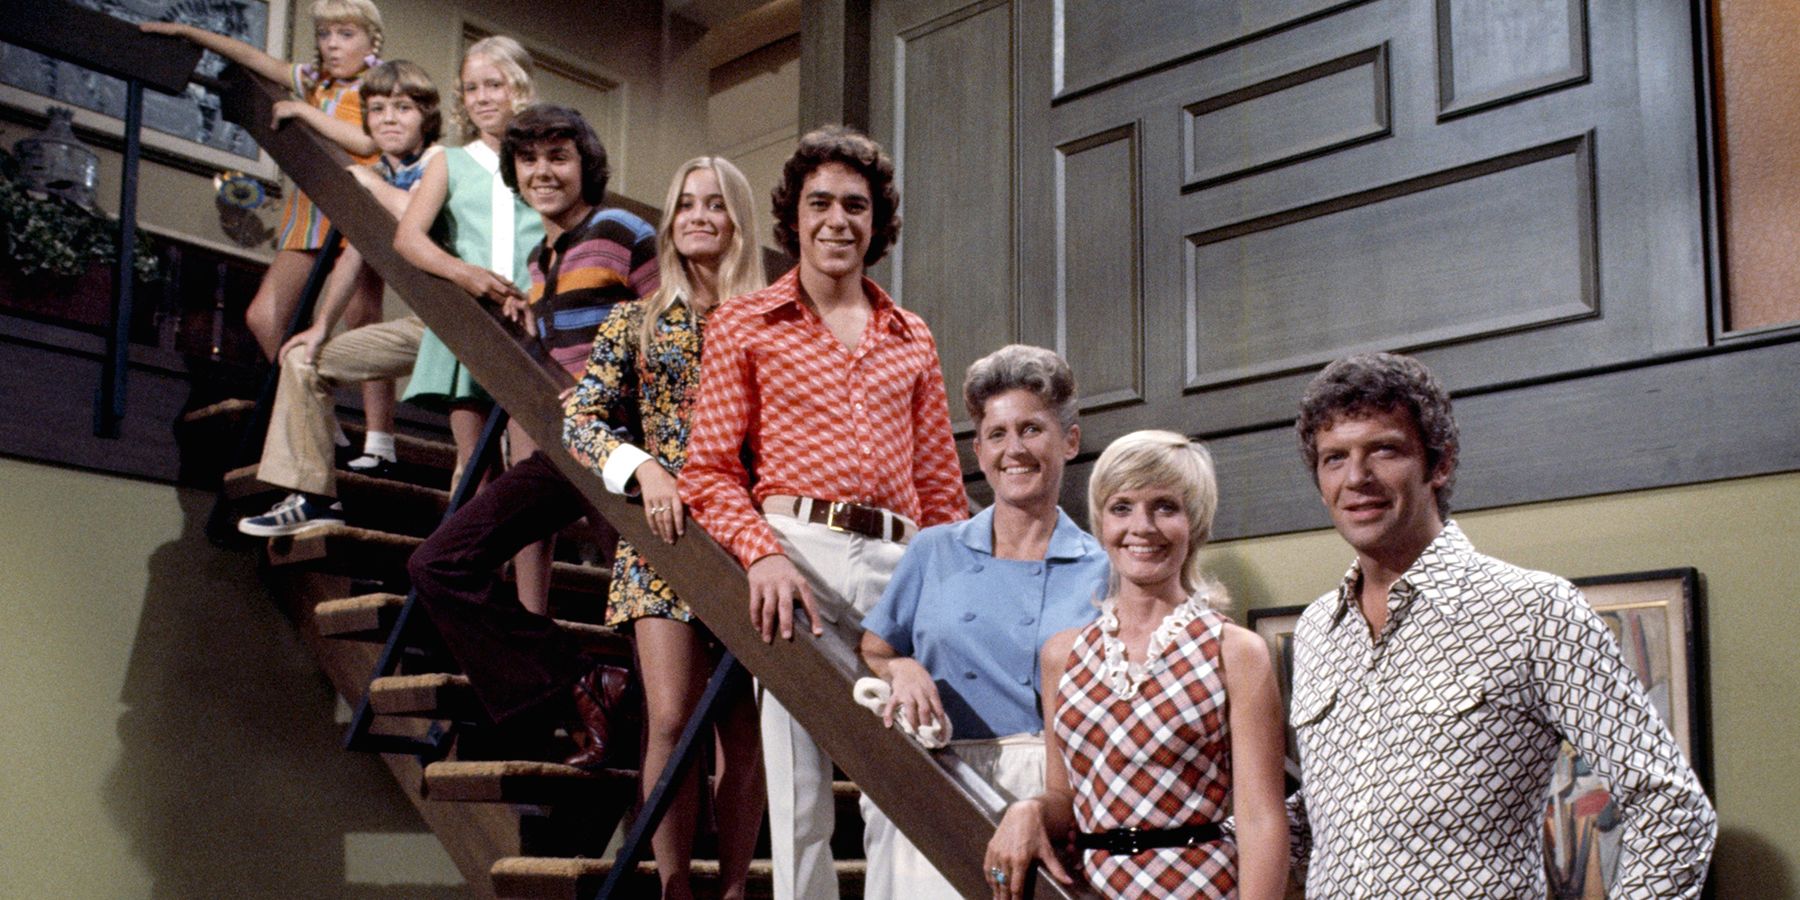 The cast of the Brady Bunch